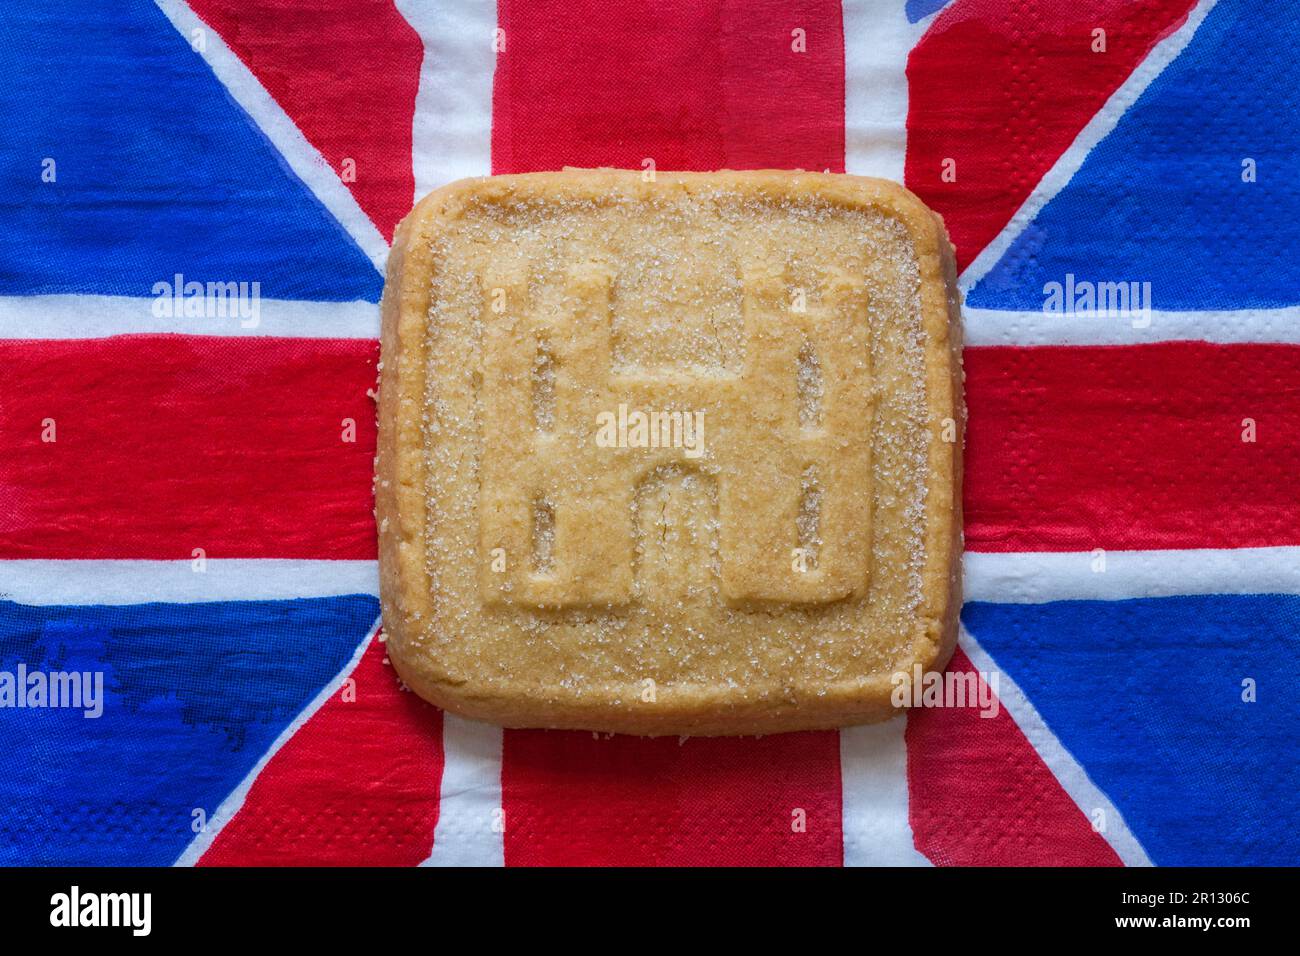 all butter shortbread biscuit to commemorate The Coronation of HM King Charles III 2023 from M&S on Union Jack napkin serviette Stock Photo